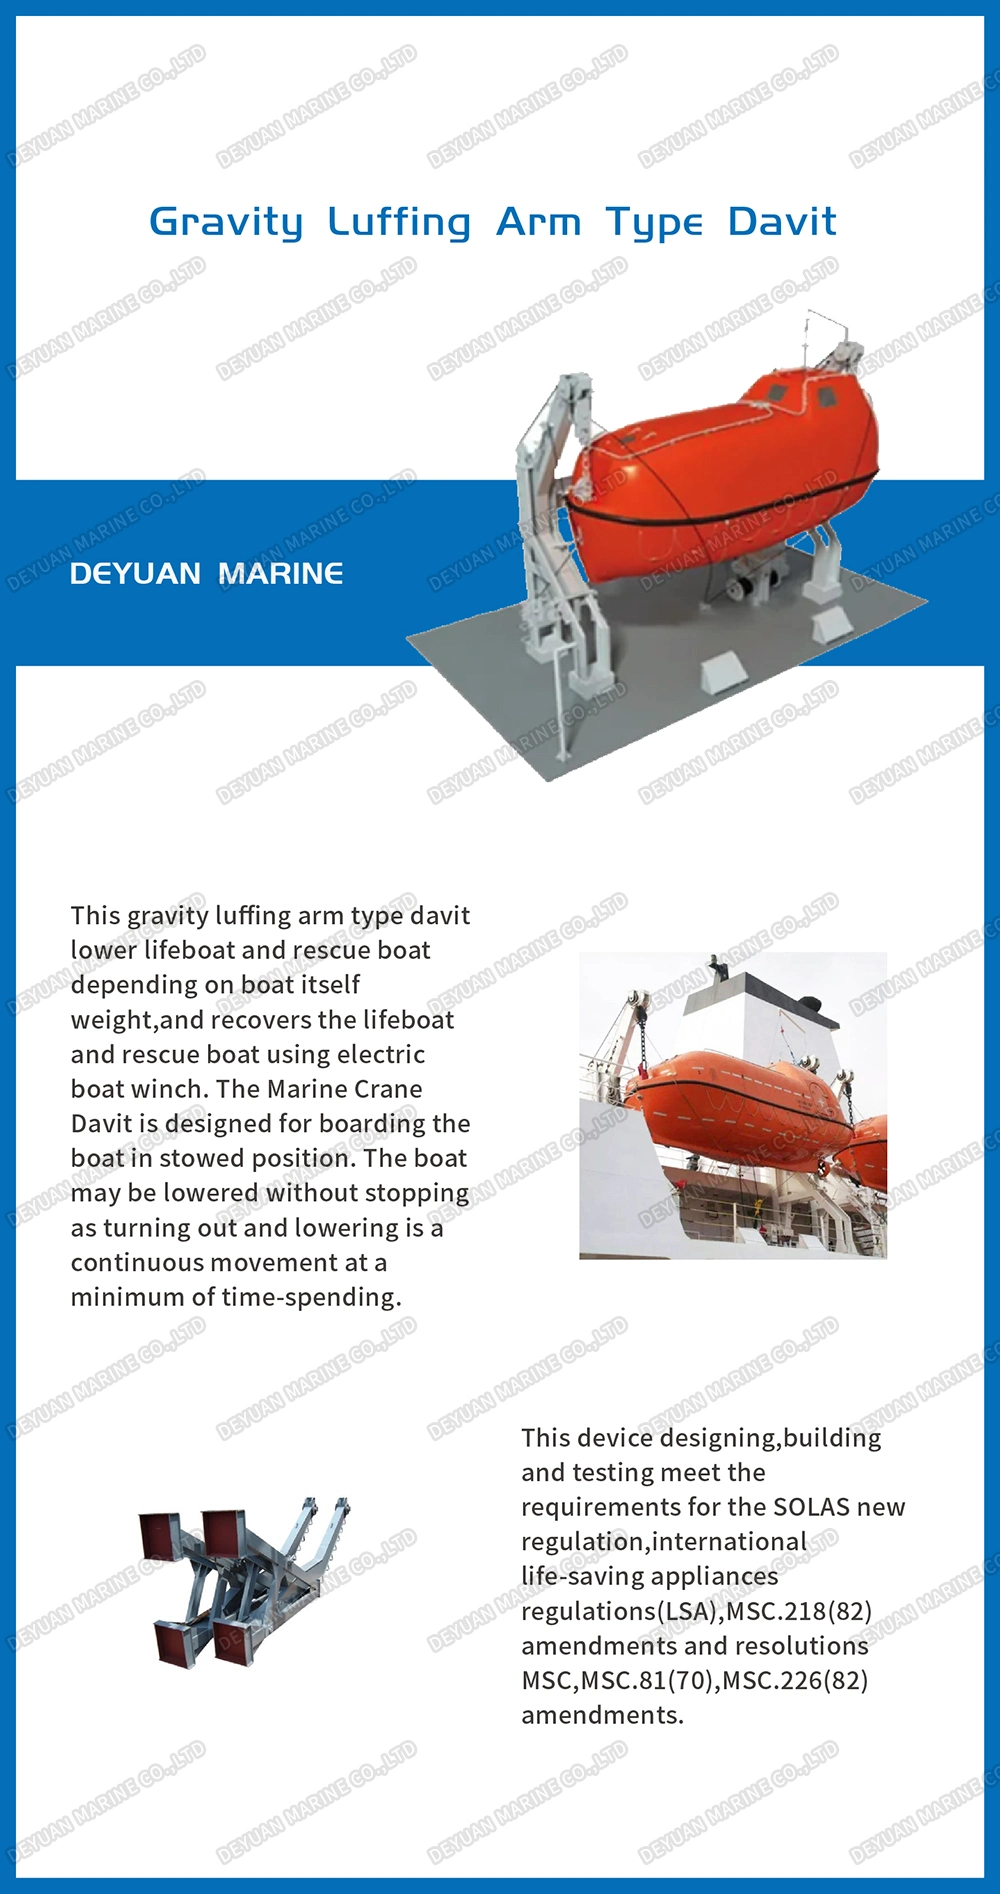 Gravity Luffing Arm Type Davit for Totally Enclosed Lifeboat